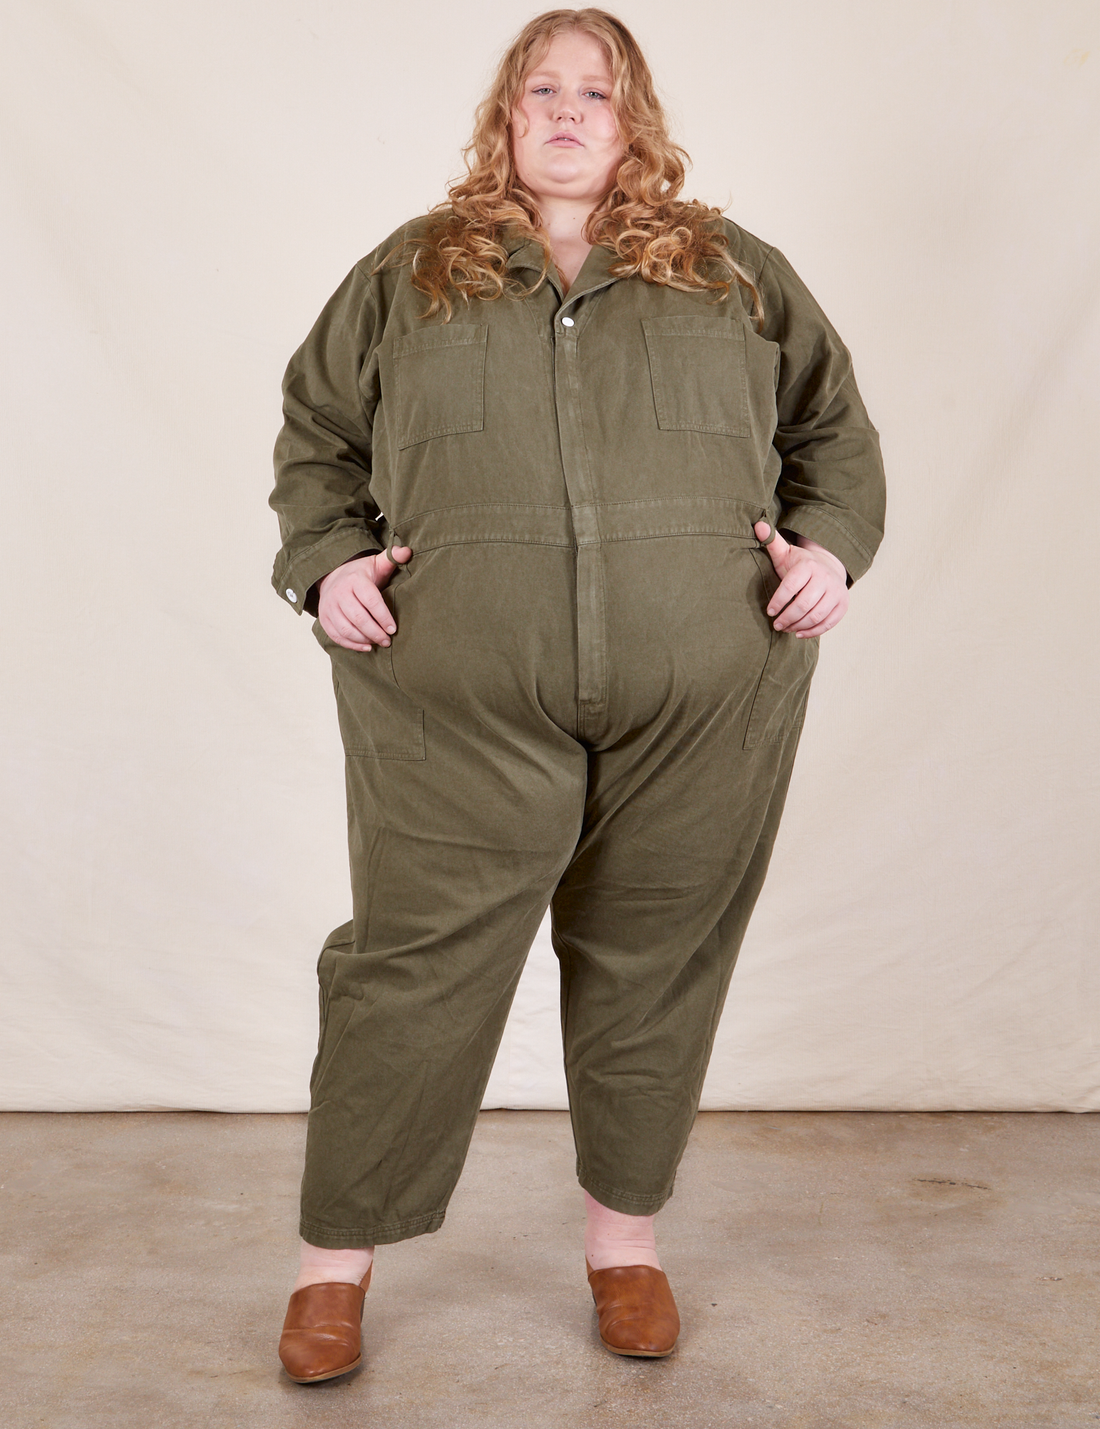 Catie is 5'11" and wearing 5XL Everyday Jumpsuit in Surplus Green